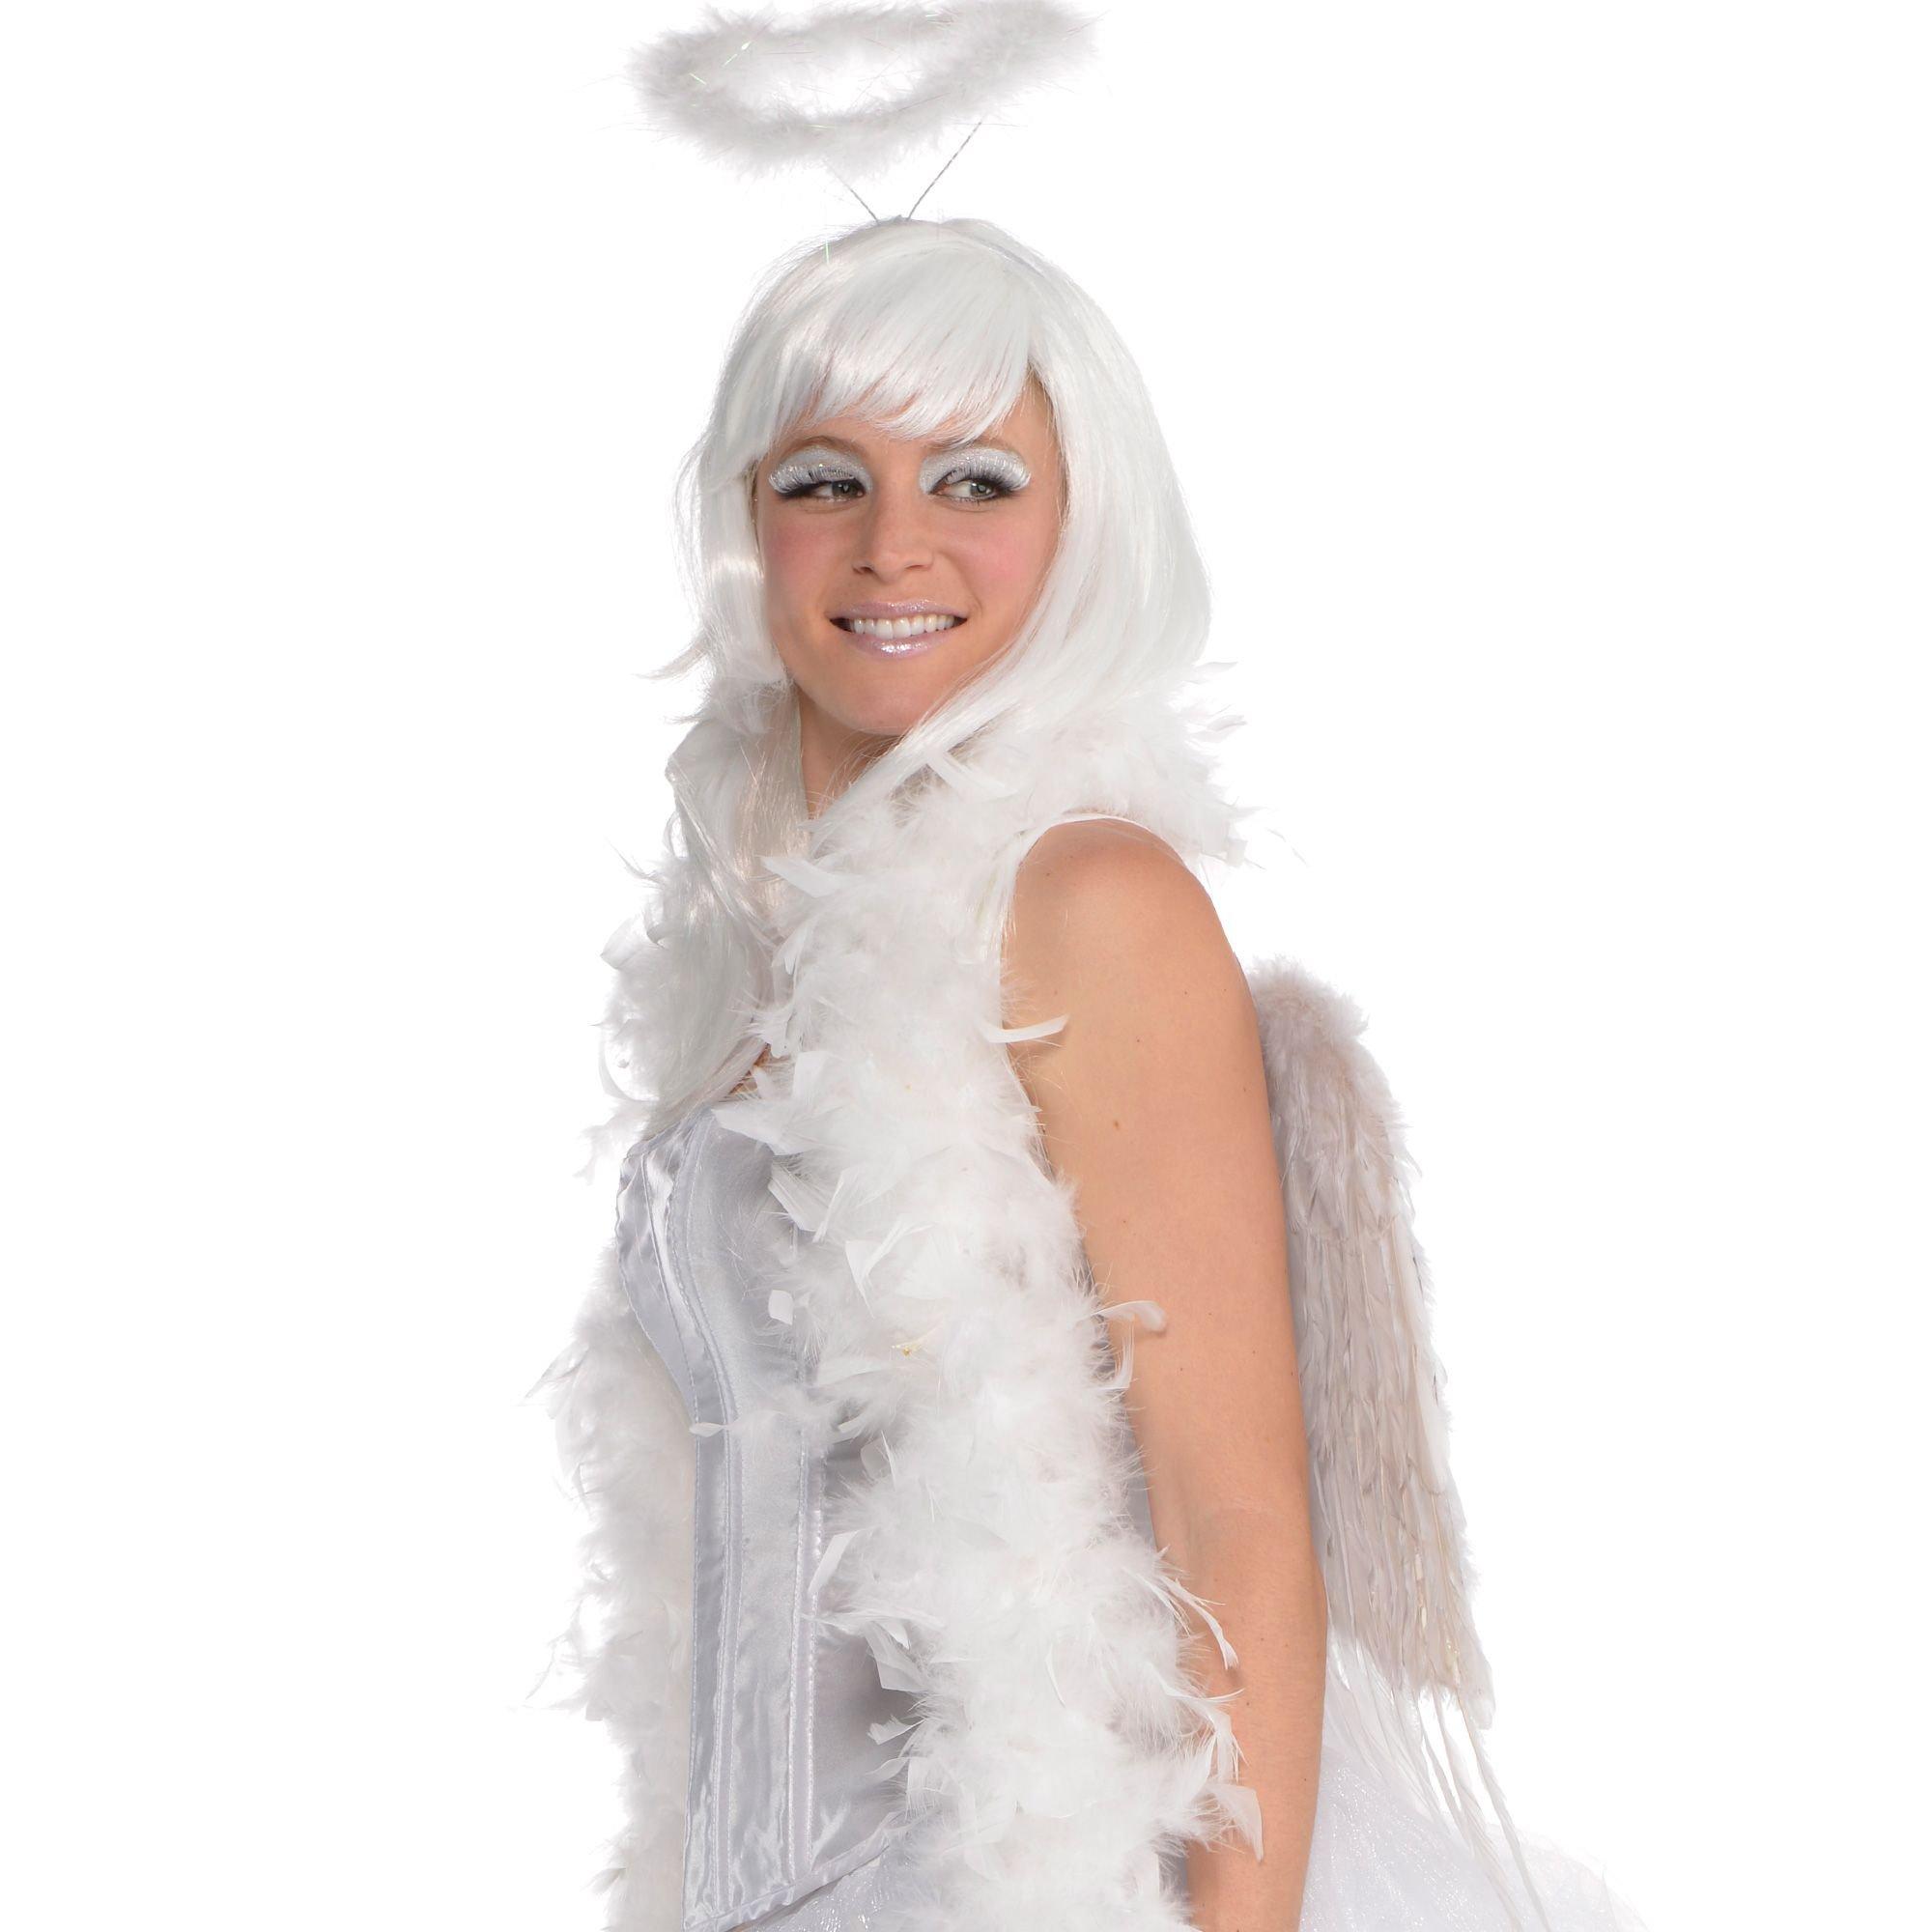 White feather Boa. The coolest